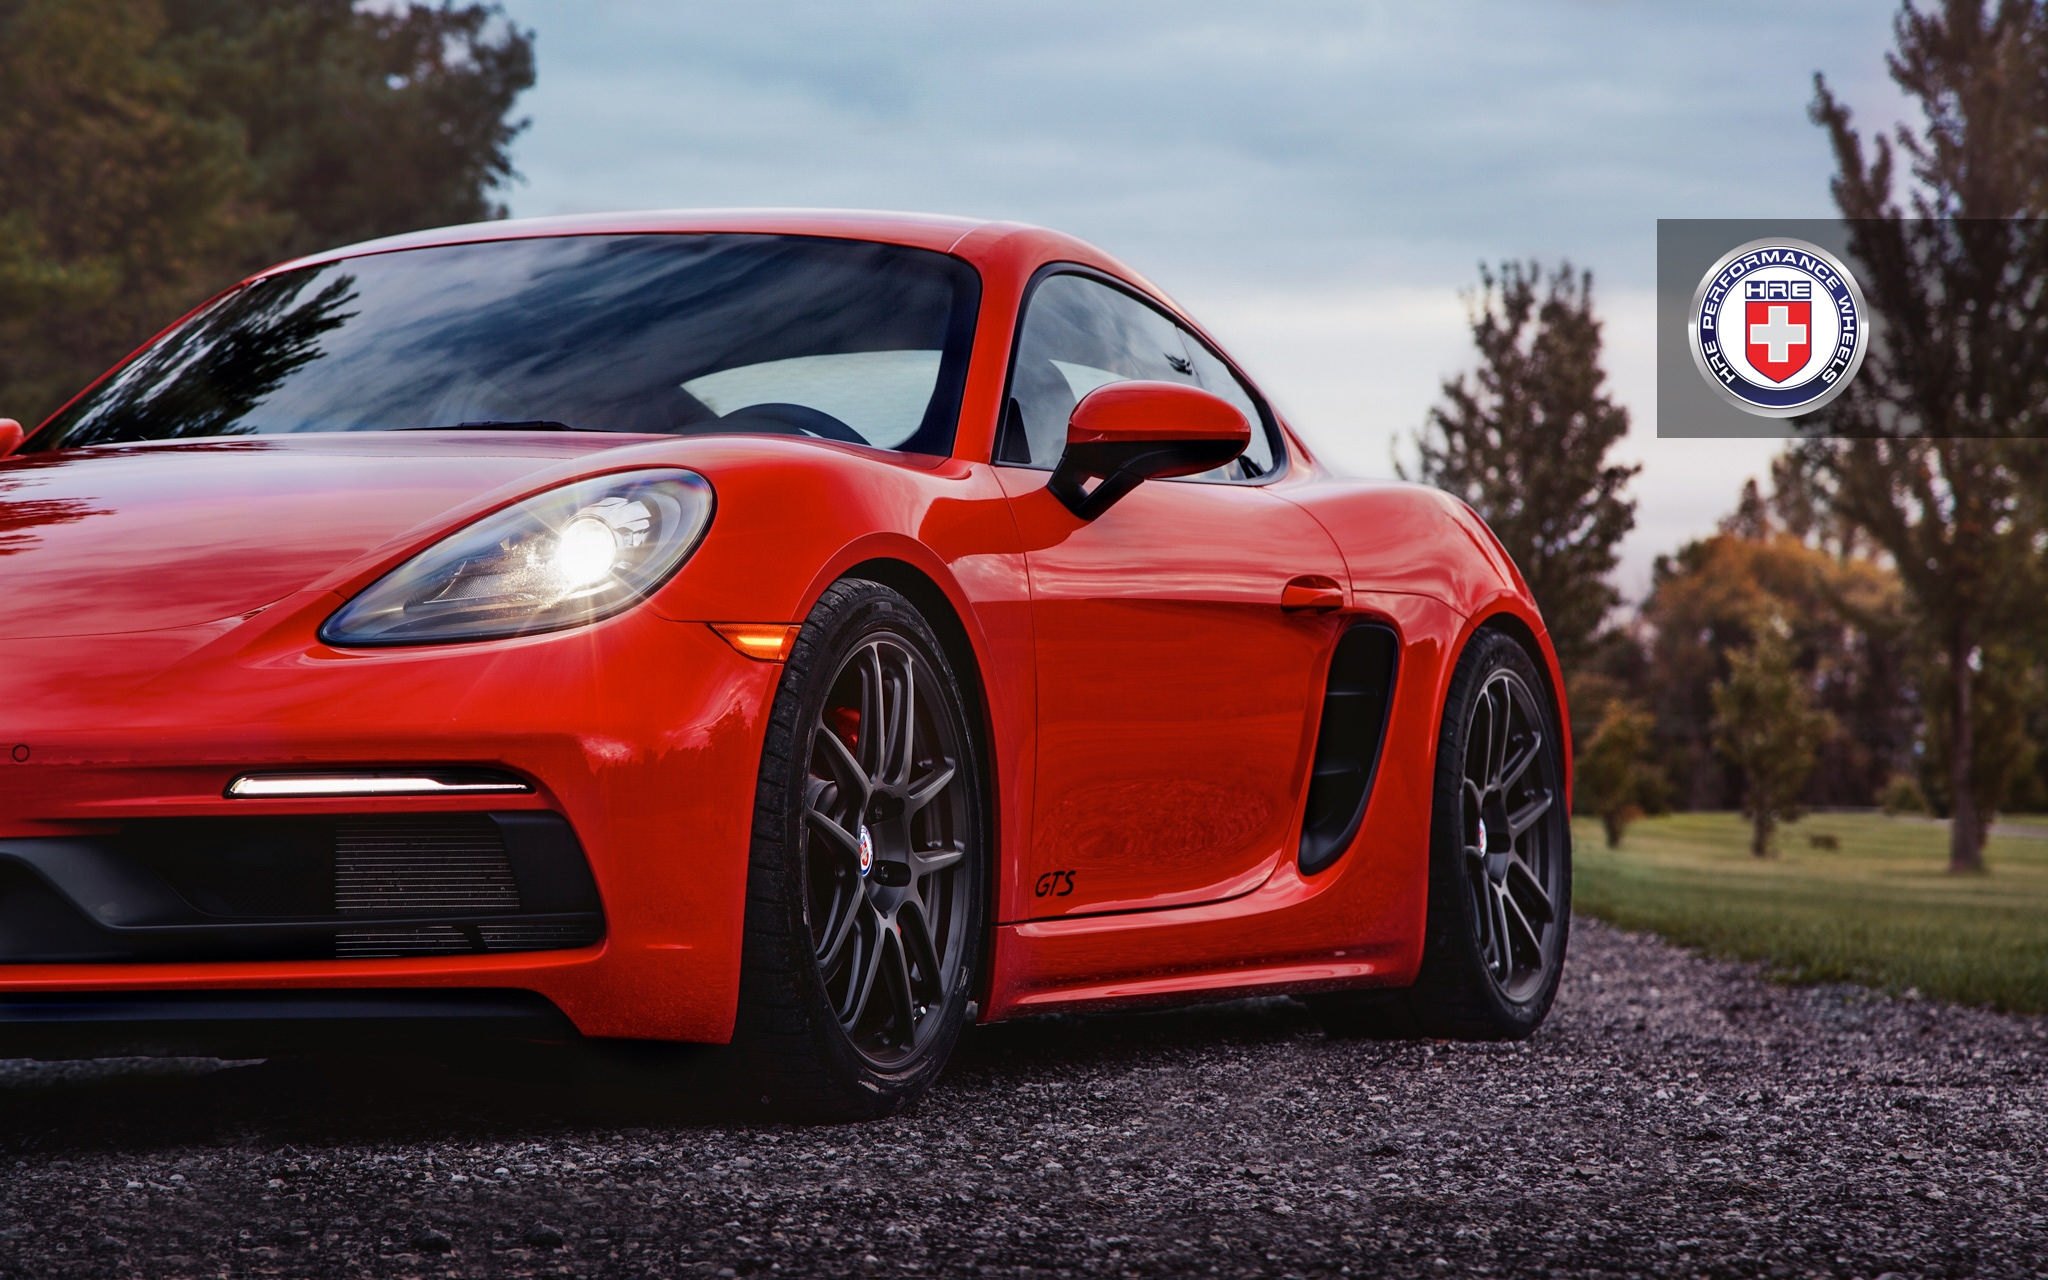 Aftermarket Front Bumper on Red Porsche Cayman - Photo by HRE Wheels